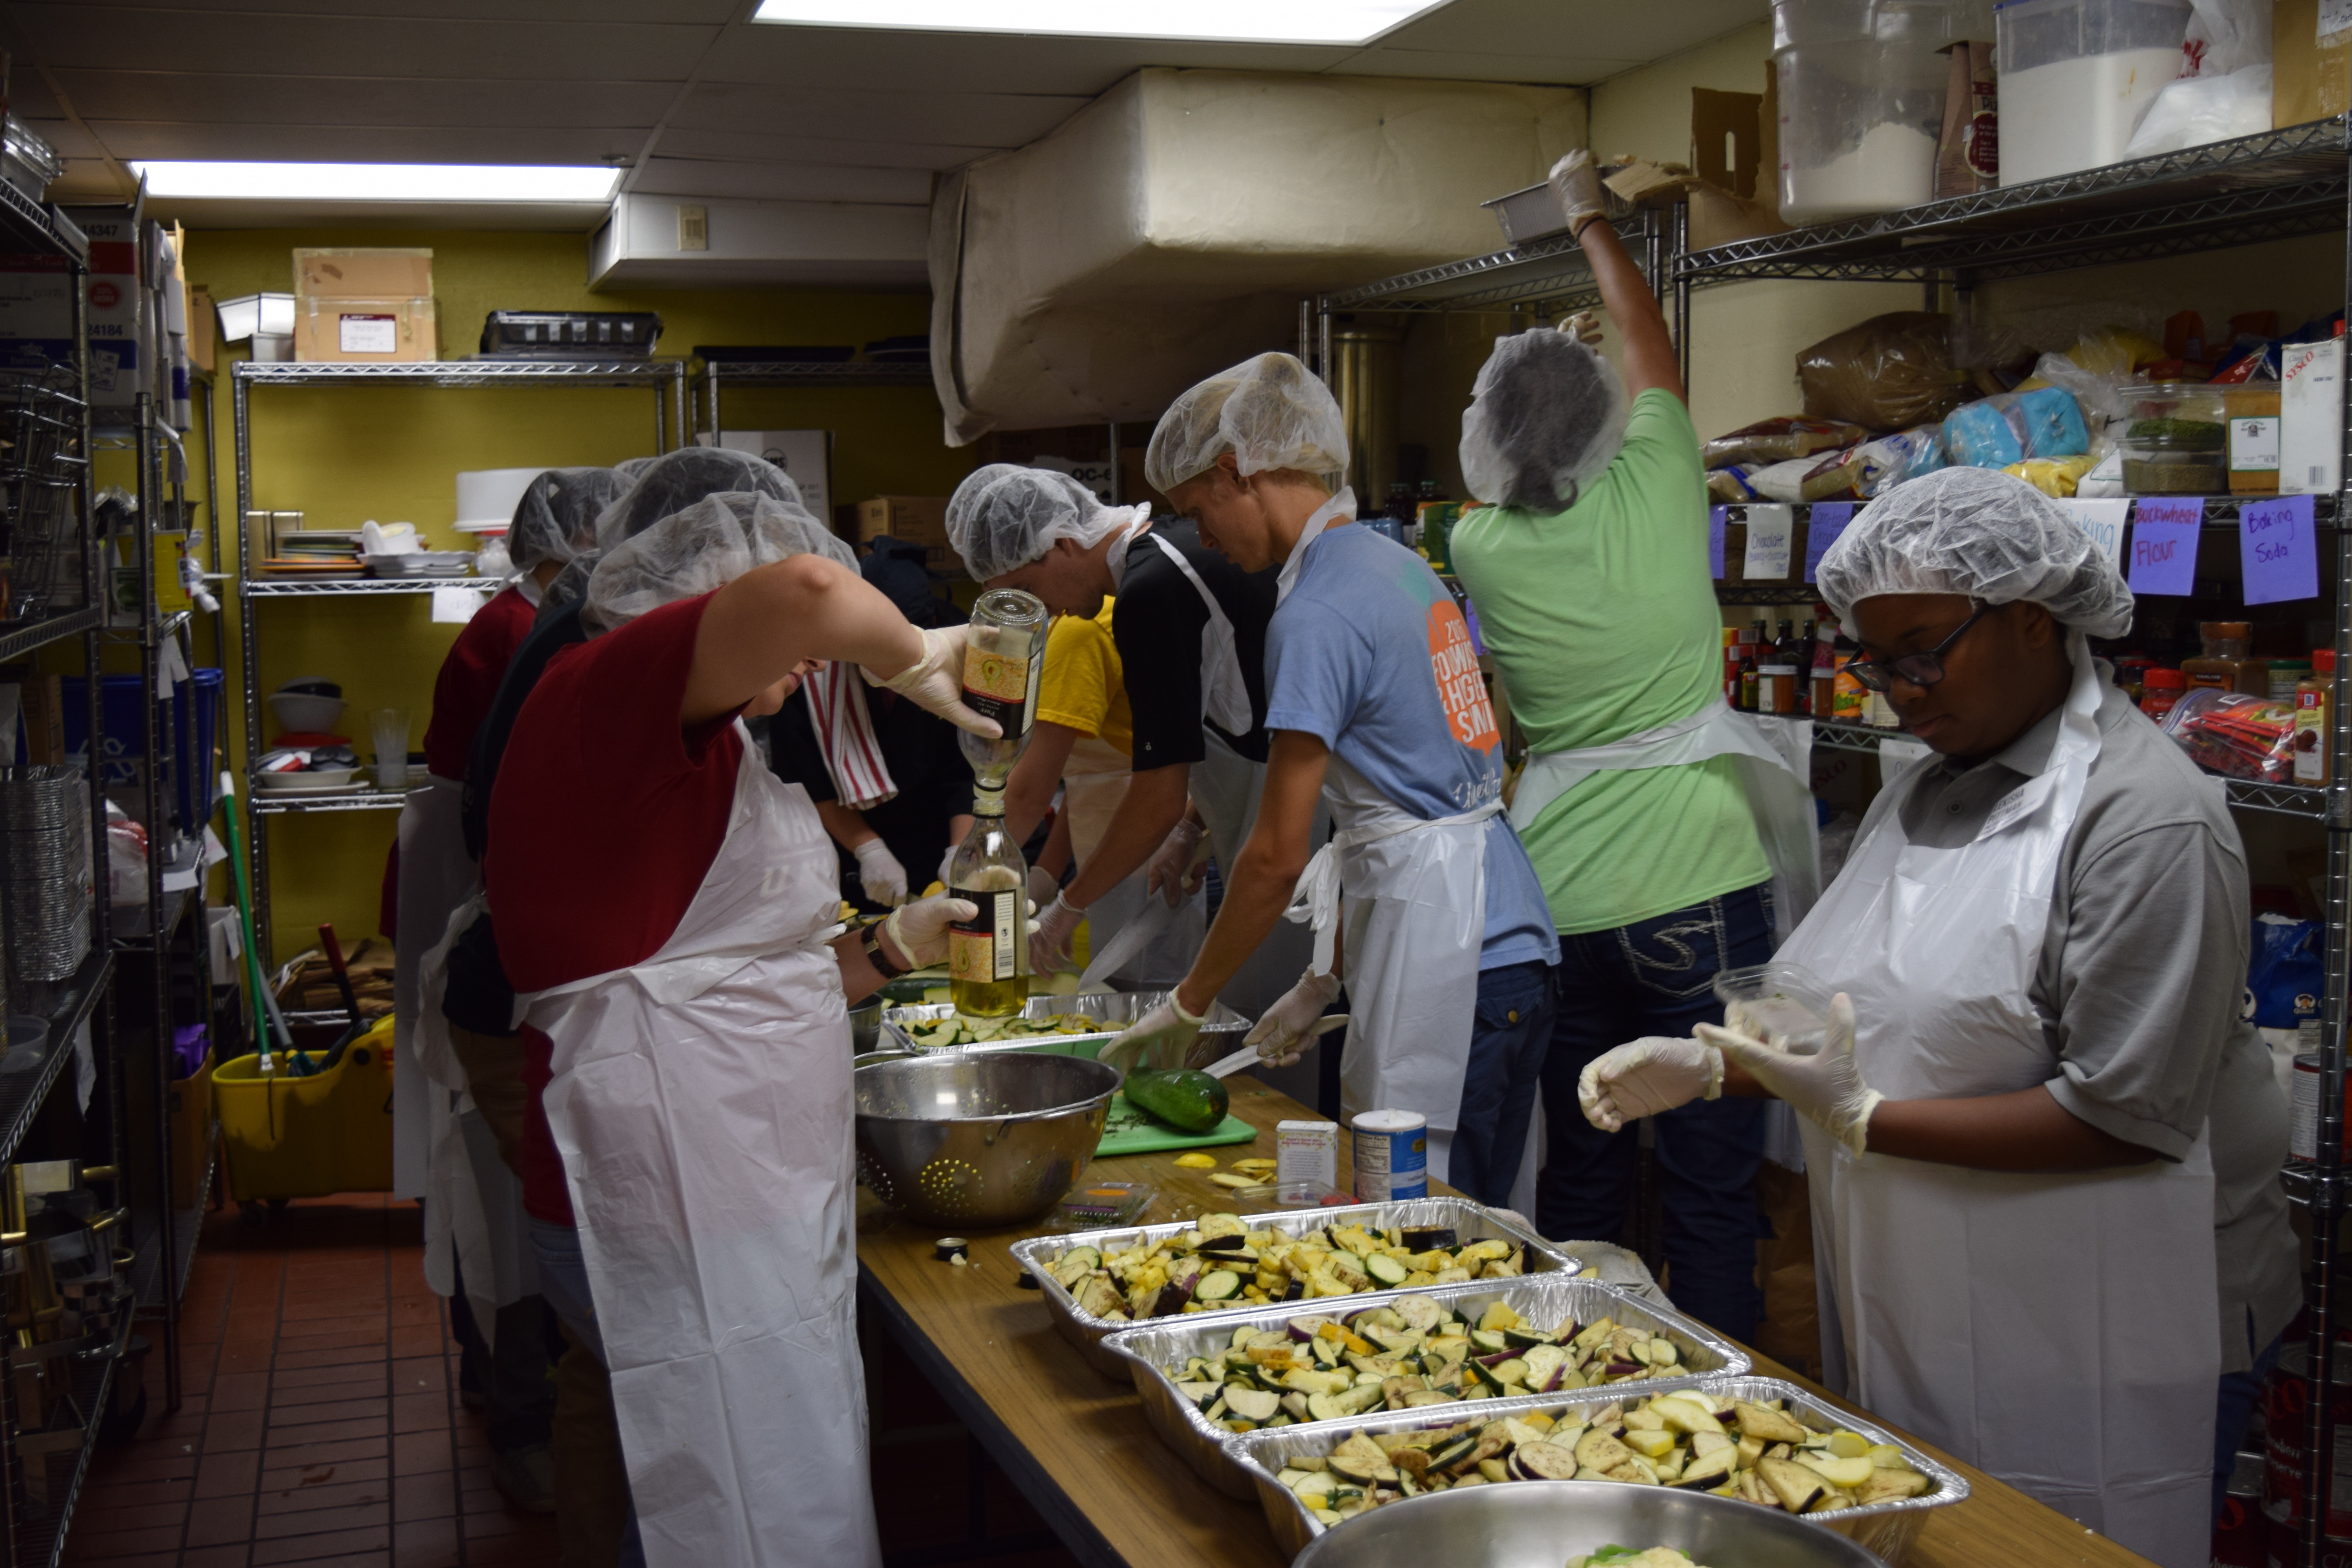 Students work in a Campus Kitchen to make meals for those in need